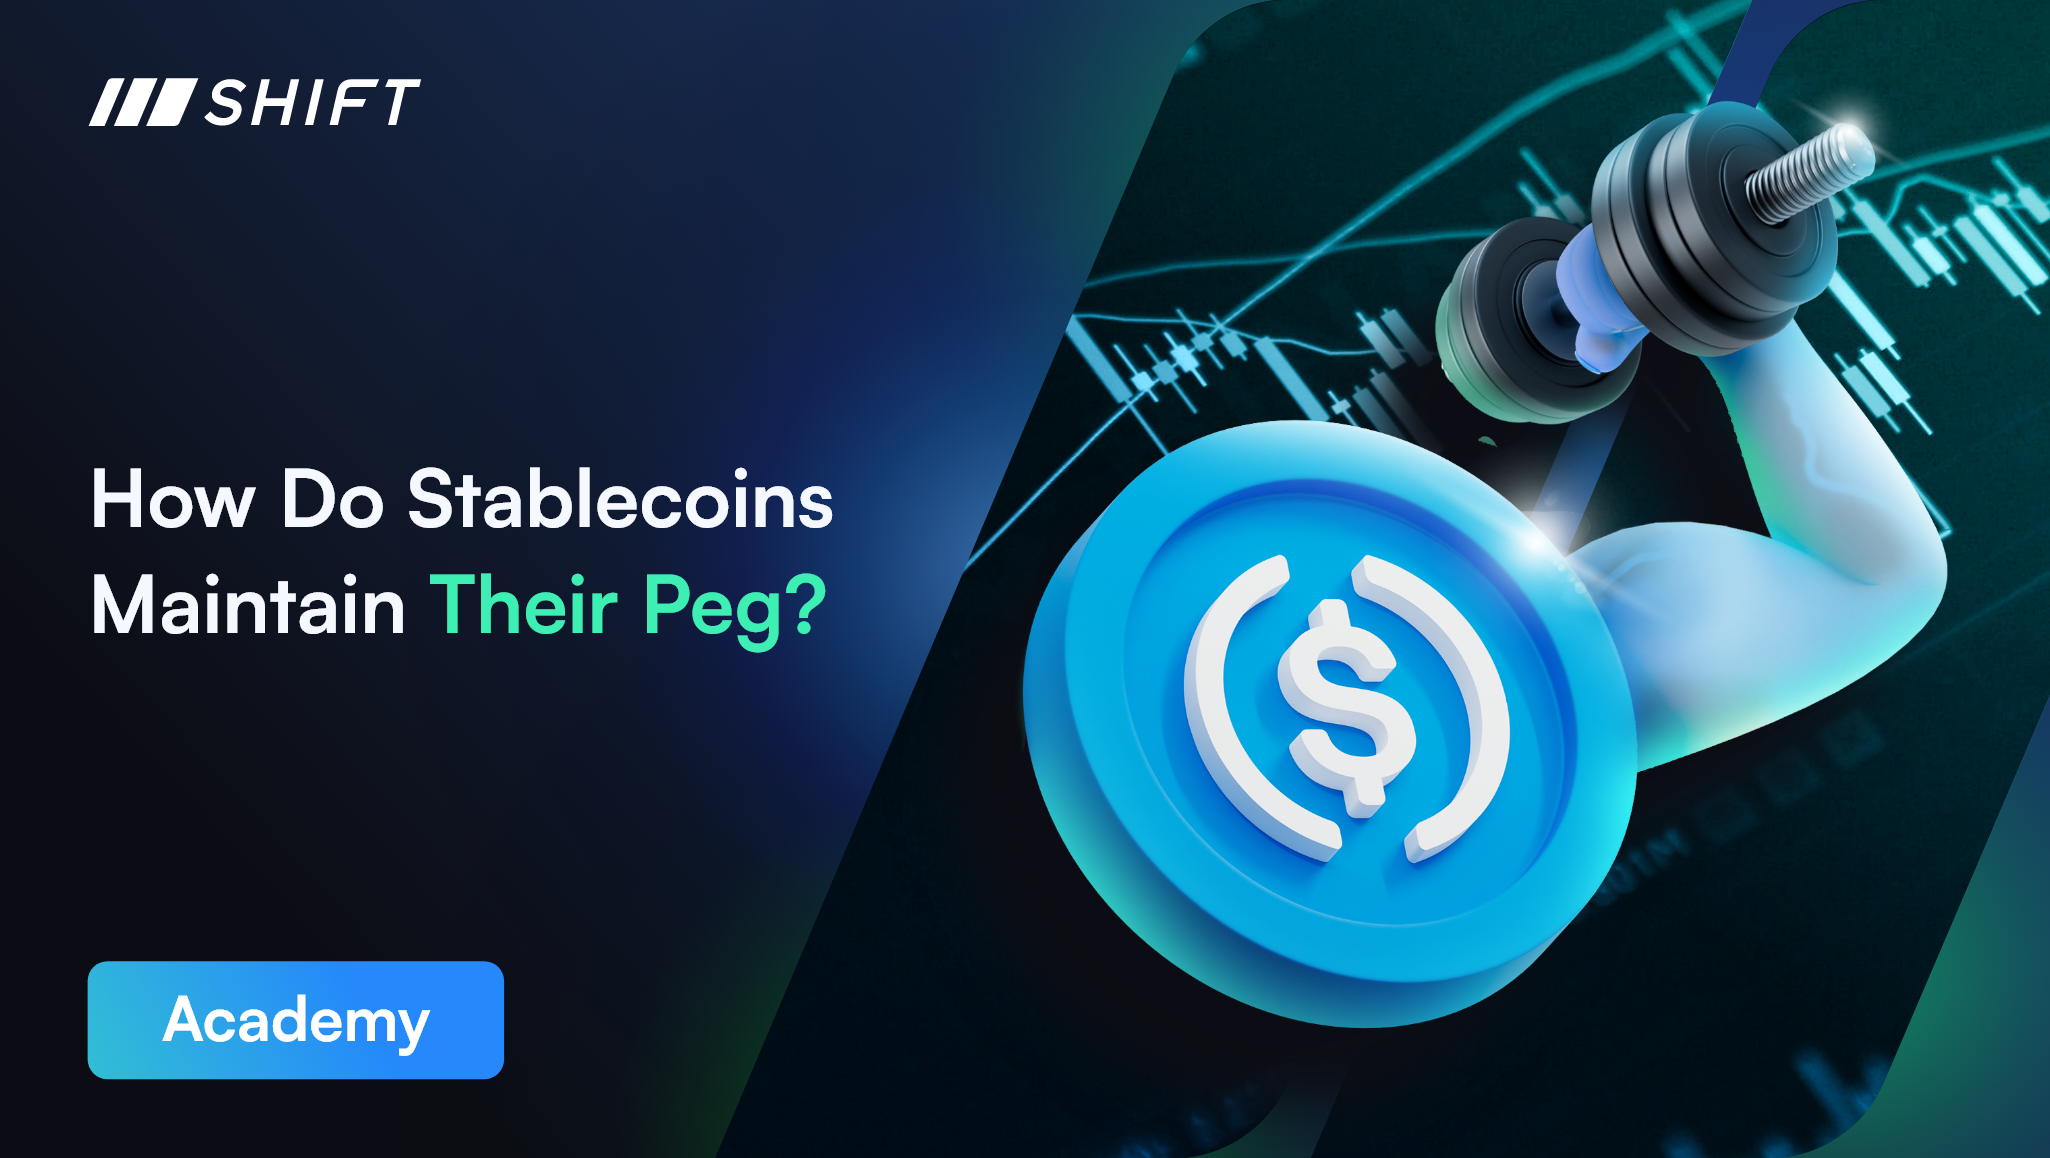 It is pivotal for Stablecoins to maintain their peg in order to retain their value.